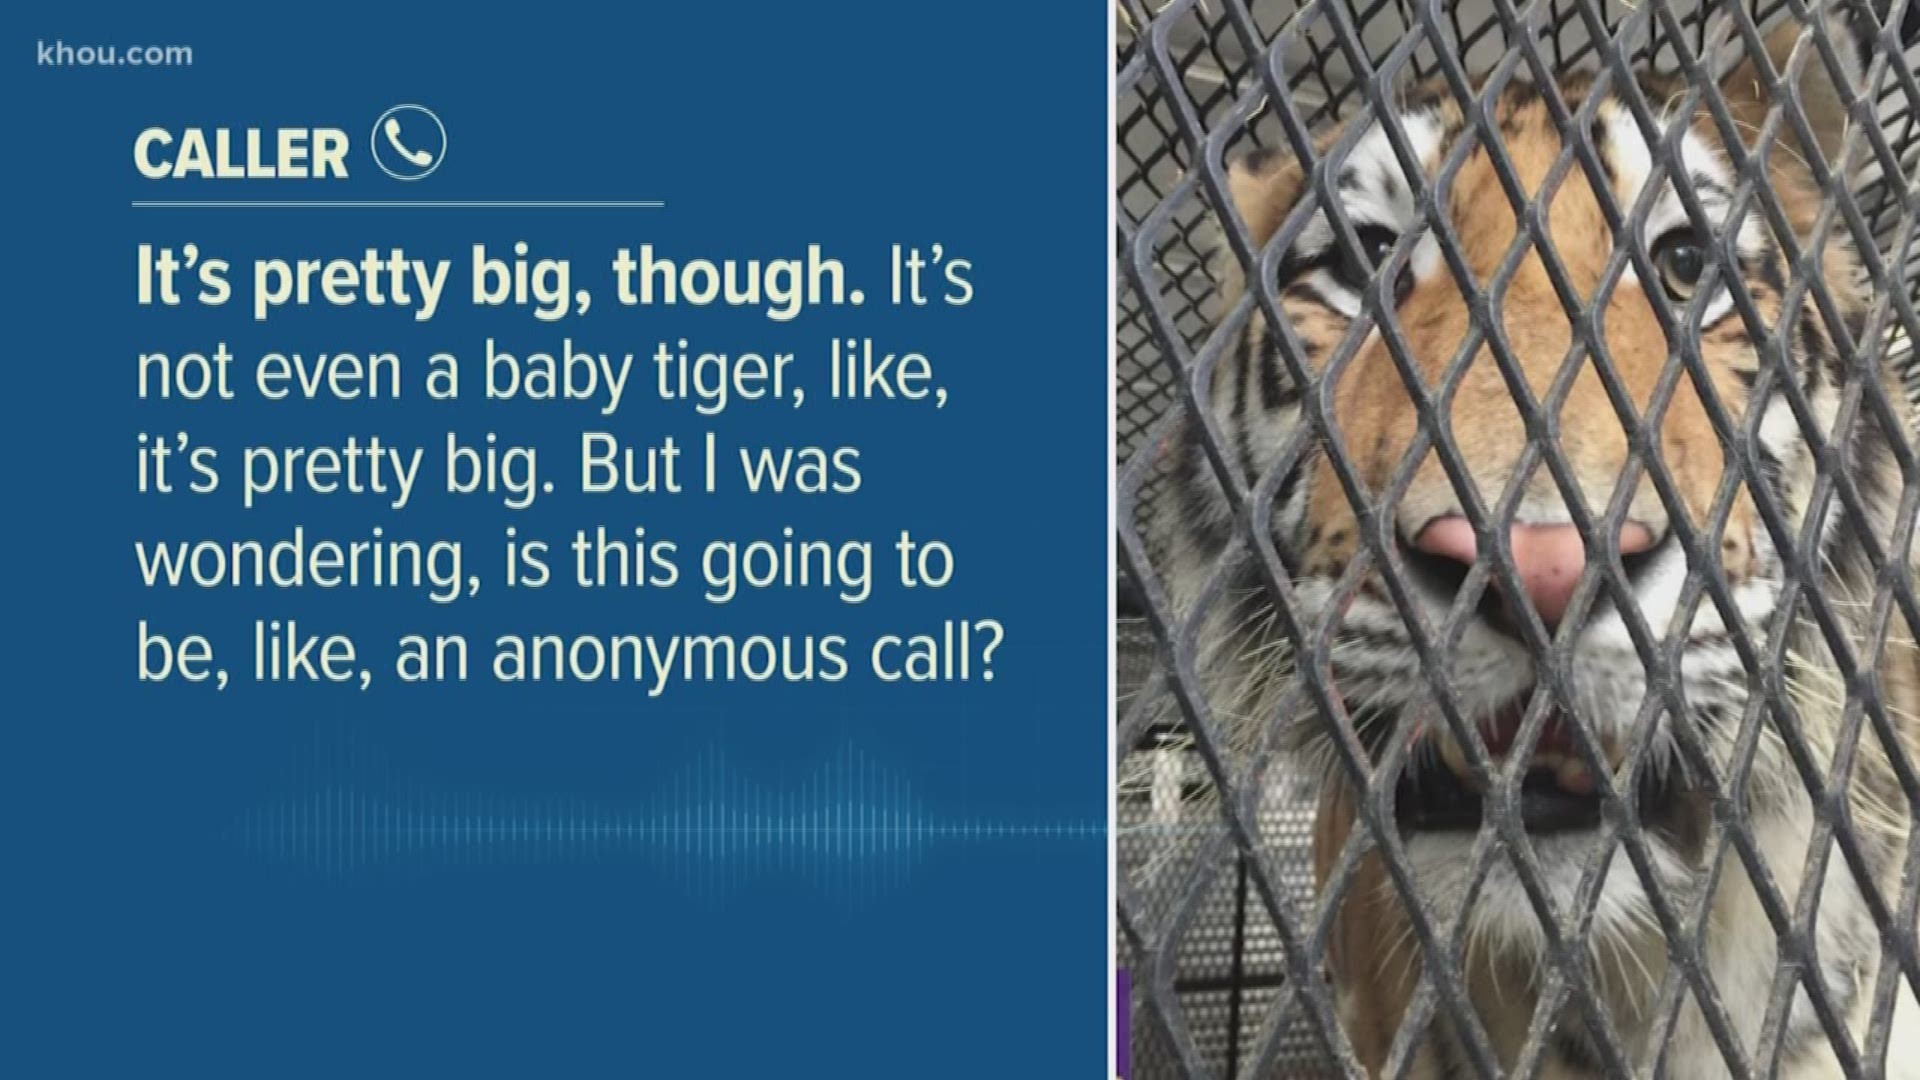 Listen to the phone call a woman made to 311 to report a tiger left abandoned in a southeast Houston home.